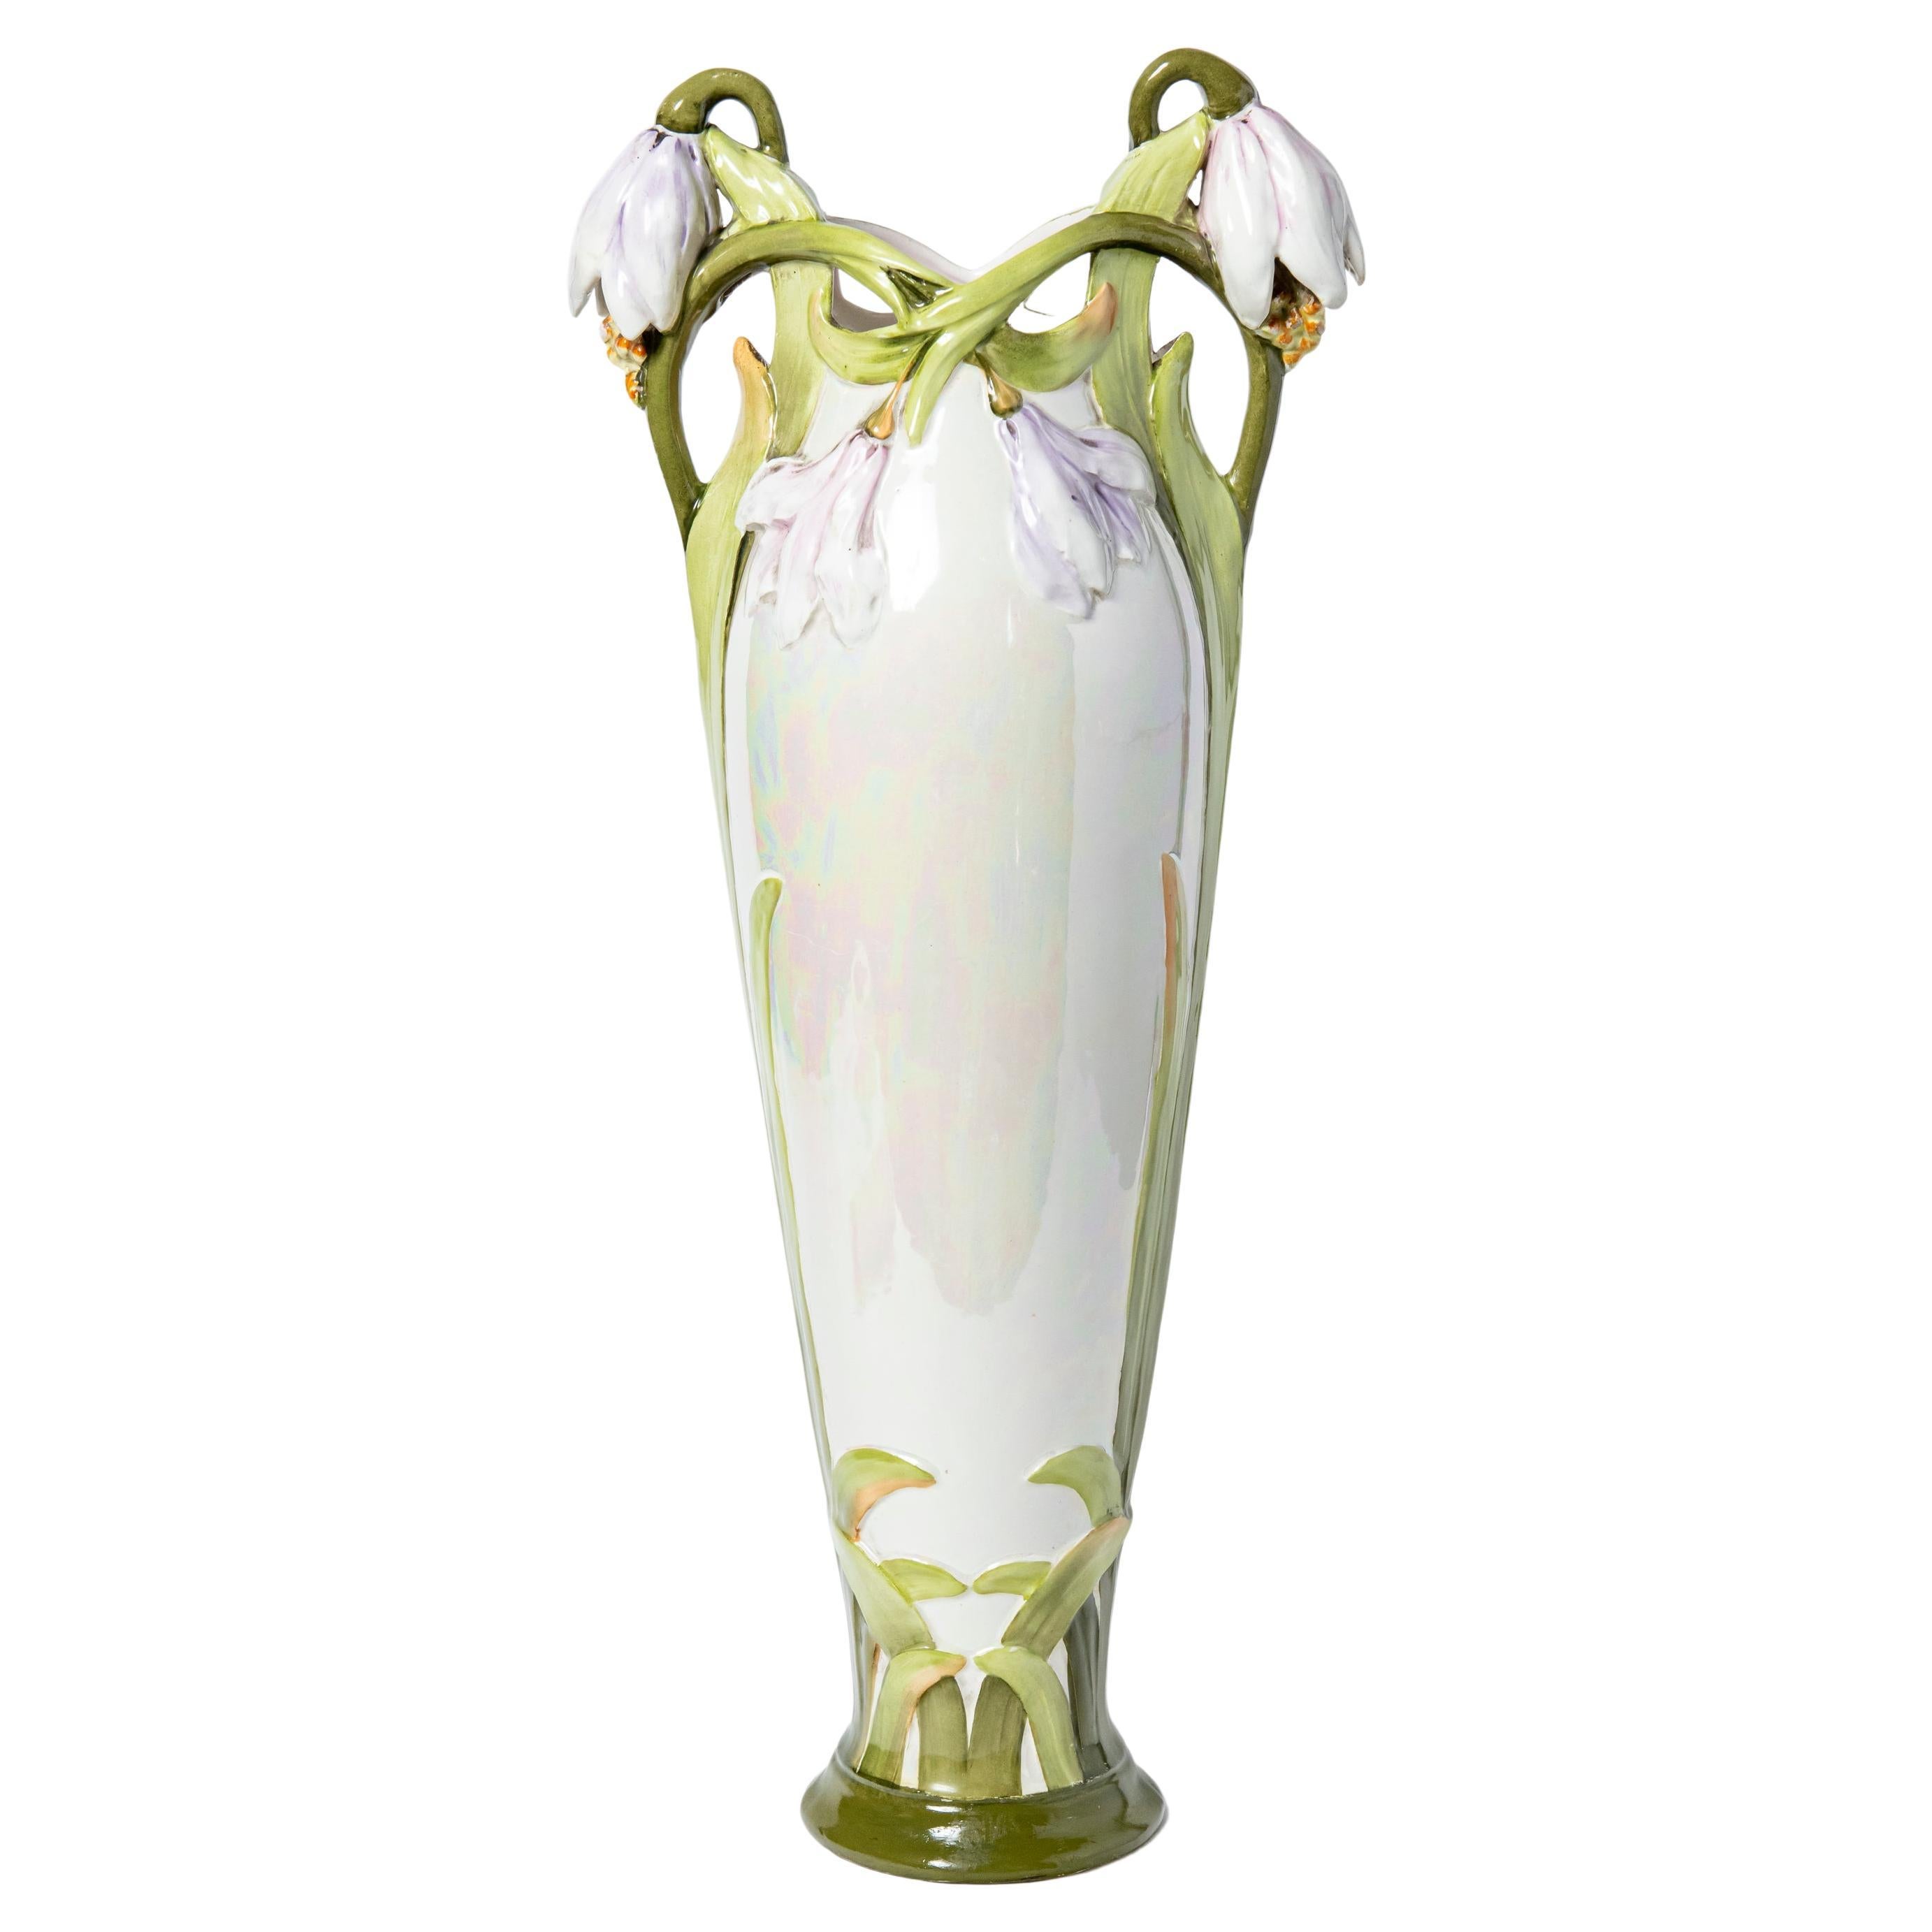  Glazed Ceramic vase, Art Nouveau Period, France, Early 20th Century. For Sale